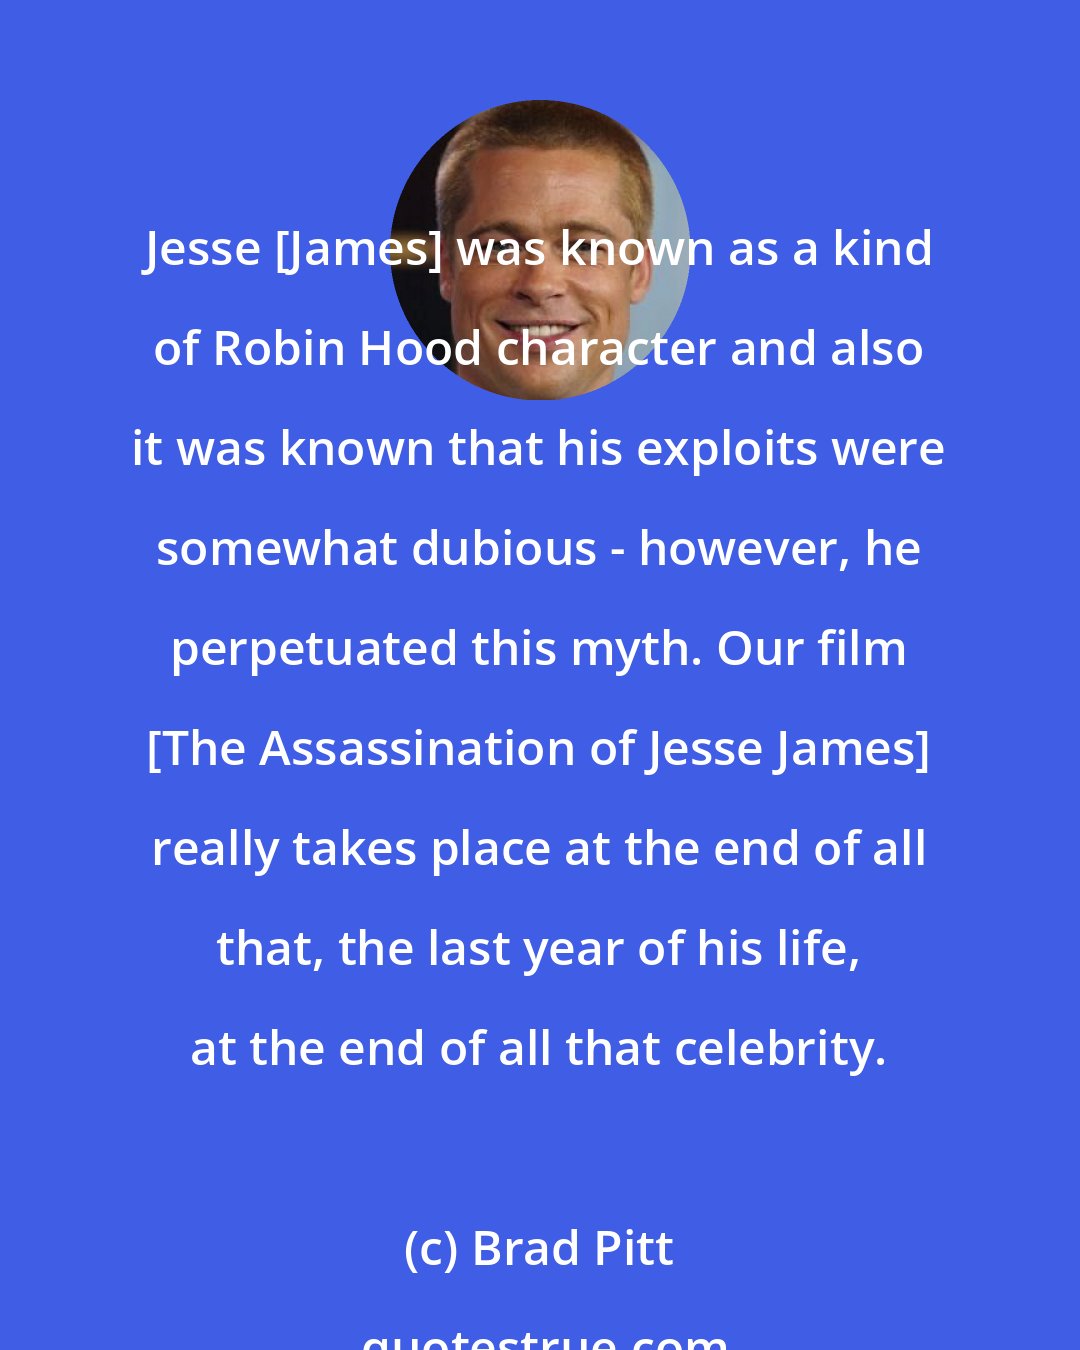 Brad Pitt: Jesse [James] was known as a kind of Robin Hood character and also it was known that his exploits were somewhat dubious - however, he perpetuated this myth. Our film [The Assassination of Jesse James] really takes place at the end of all that, the last year of his life, at the end of all that celebrity.